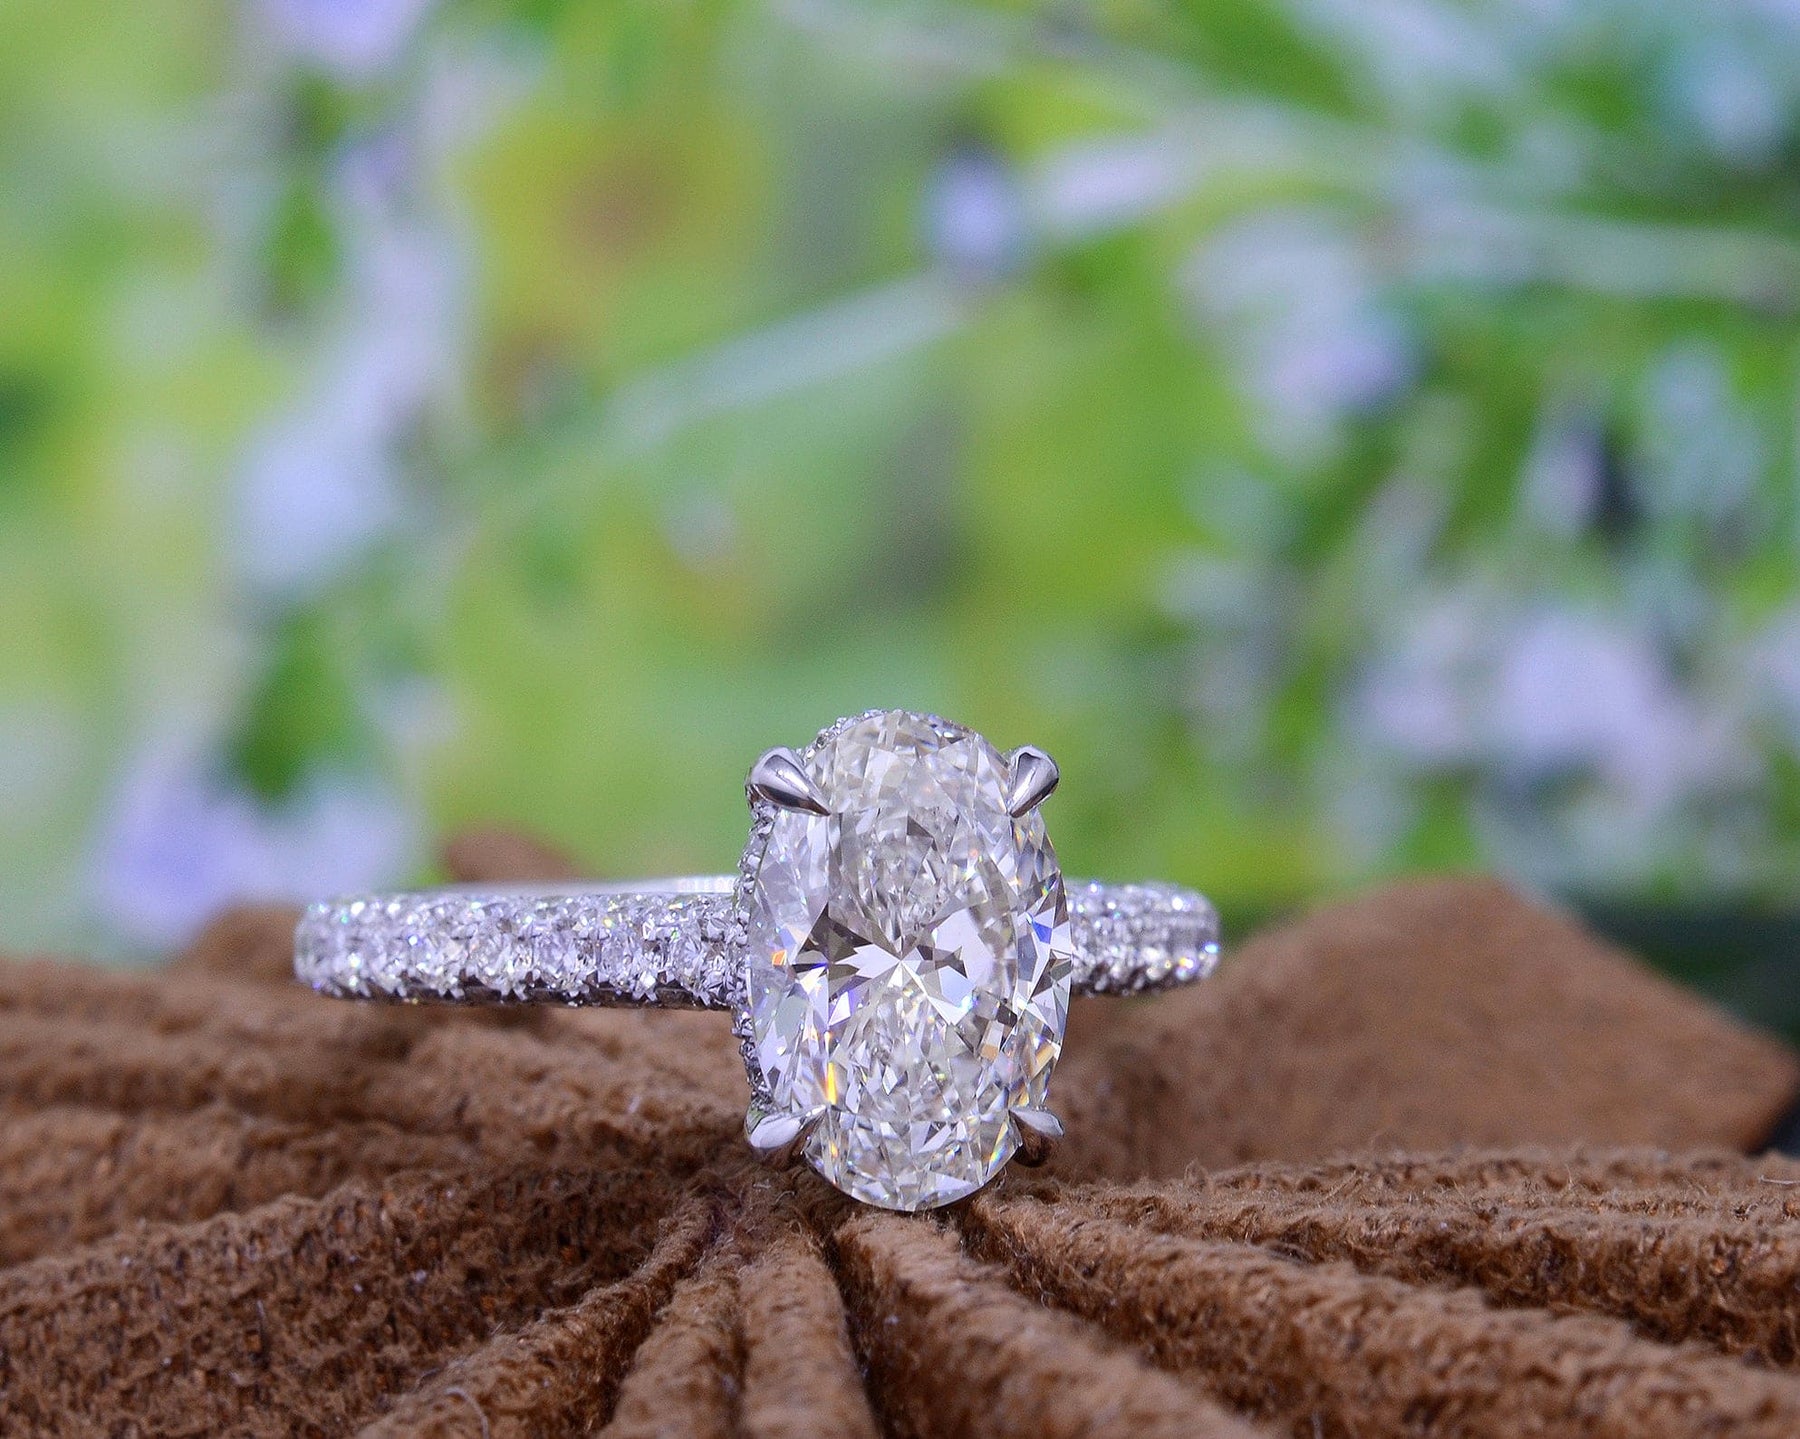 The Top 5 Best Selling 1 Carat Engagement Rings